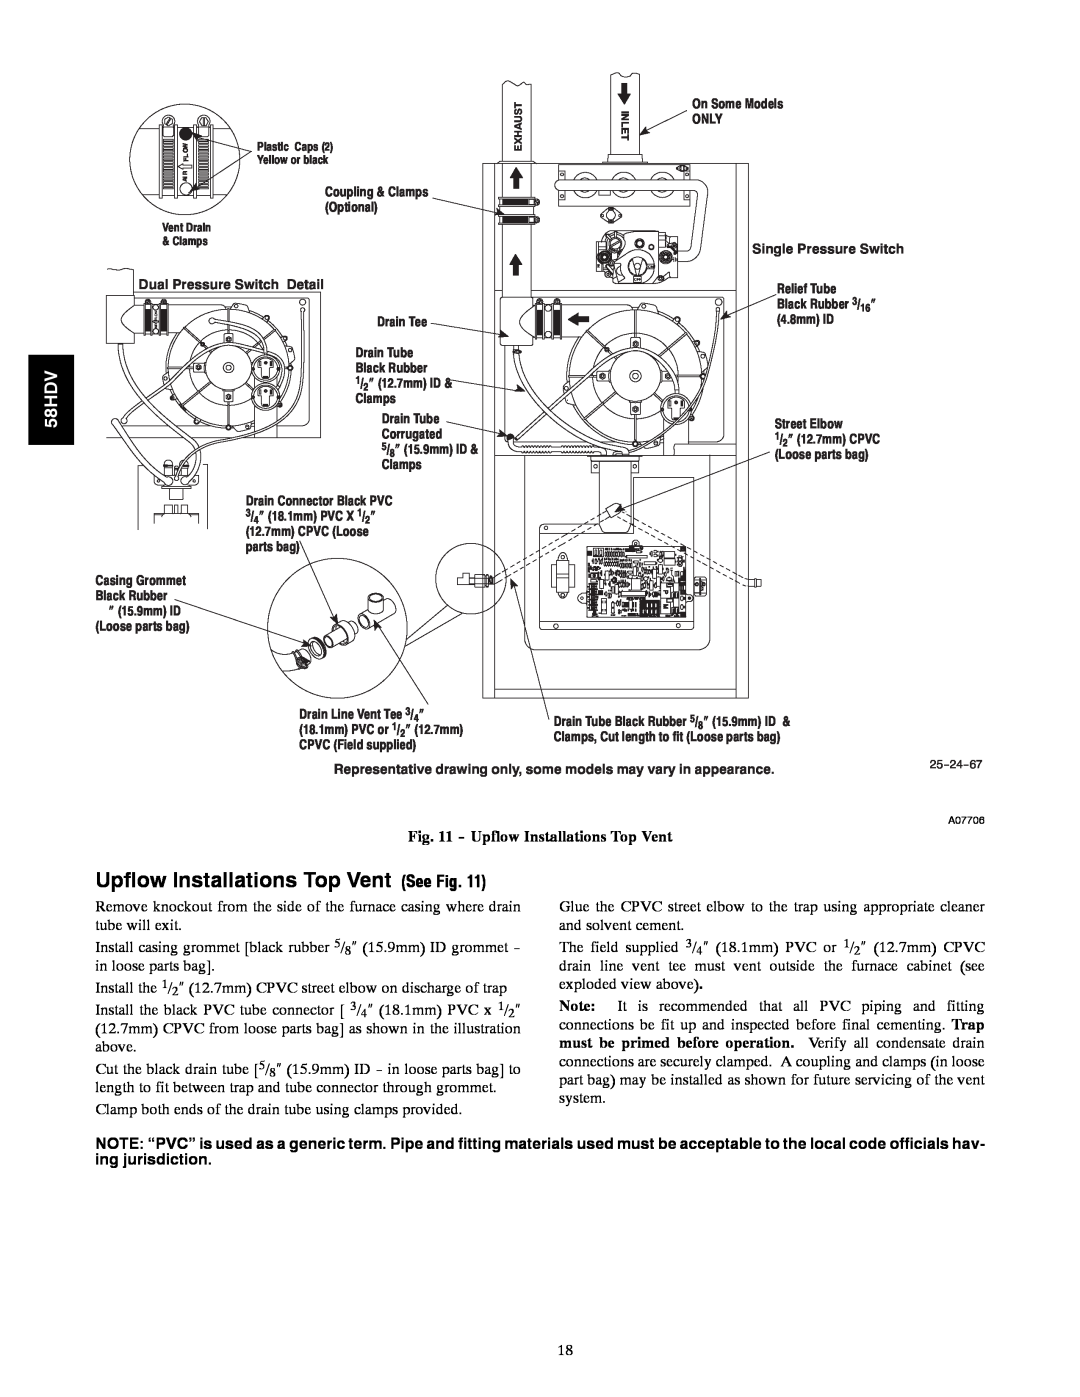 Carrier 58HDV installation instructions Upflow Installations Top Vent See Fig 